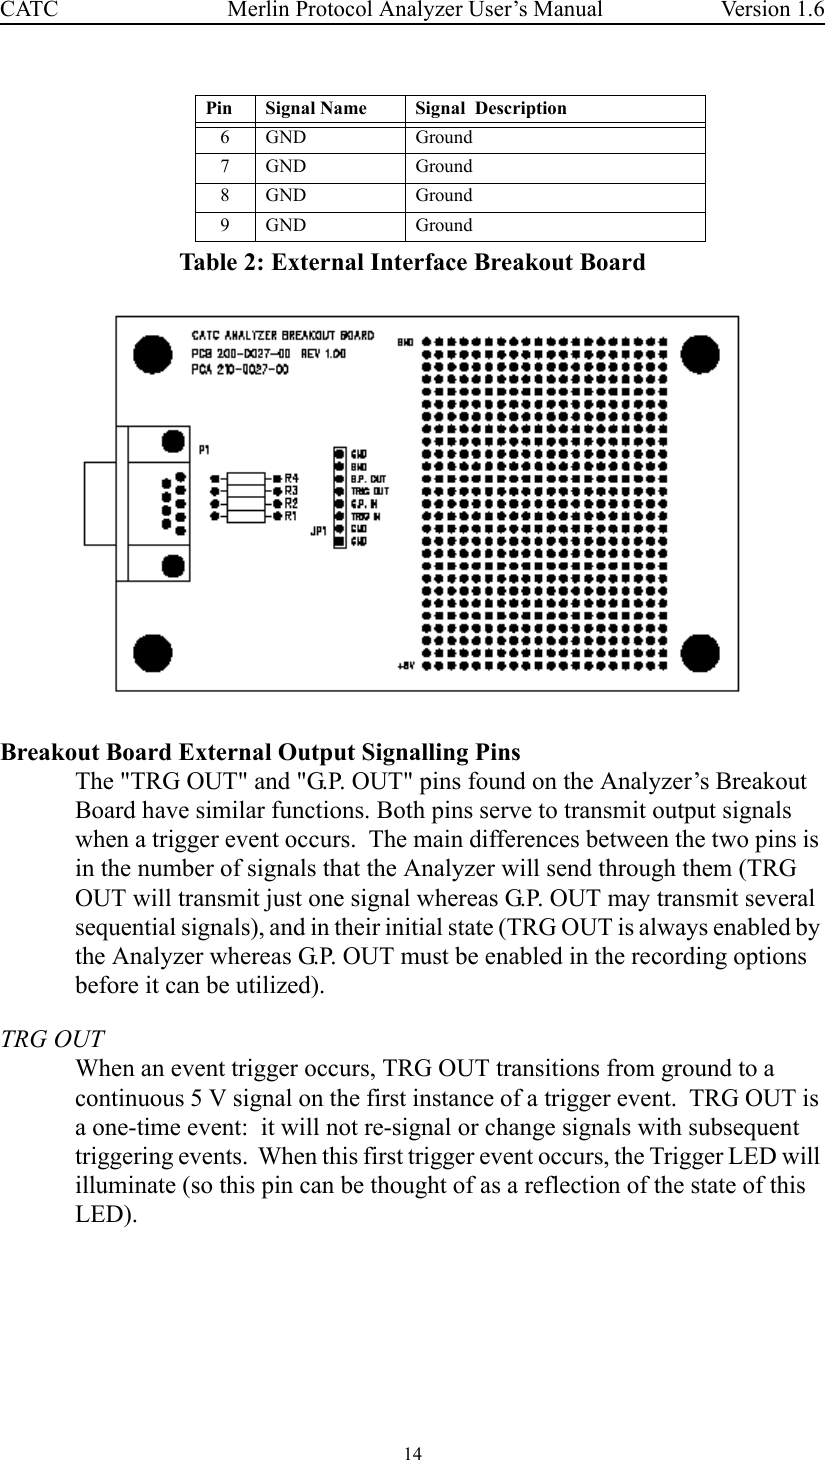 14 Merlin Protocol Analyzer User’s ManualCATC Version 1.6Table 2: External Interface Breakout BoardBreakout Board External Output Signalling PinsThe &quot;TRG OUT&quot; and &quot;G.P. OUT&quot; pins found on the Analyzer’s Breakout Board have similar functions. Both pins serve to transmit output signals when a trigger event occurs.  The main differences between the two pins is in the number of signals that the Analyzer will send through them (TRG OUT will transmit just one signal whereas G.P. OUT may transmit several sequential signals), and in their initial state (TRG OUT is always enabled by the Analyzer whereas G.P. OUT must be enabled in the recording options before it can be utilized).  TRG OUTWhen an event trigger occurs, TRG OUT transitions from ground to a continuous 5 V signal on the first instance of a trigger event.  TRG OUT is a one-time event:  it will not re-signal or change signals with subsequent triggering events.  When this first trigger event occurs, the Trigger LED will illuminate (so this pin can be thought of as a reflection of the state of this LED).    6 GND Ground7 GND Ground8 GND Ground9 GND GroundPin Signal Name  Signal  Description